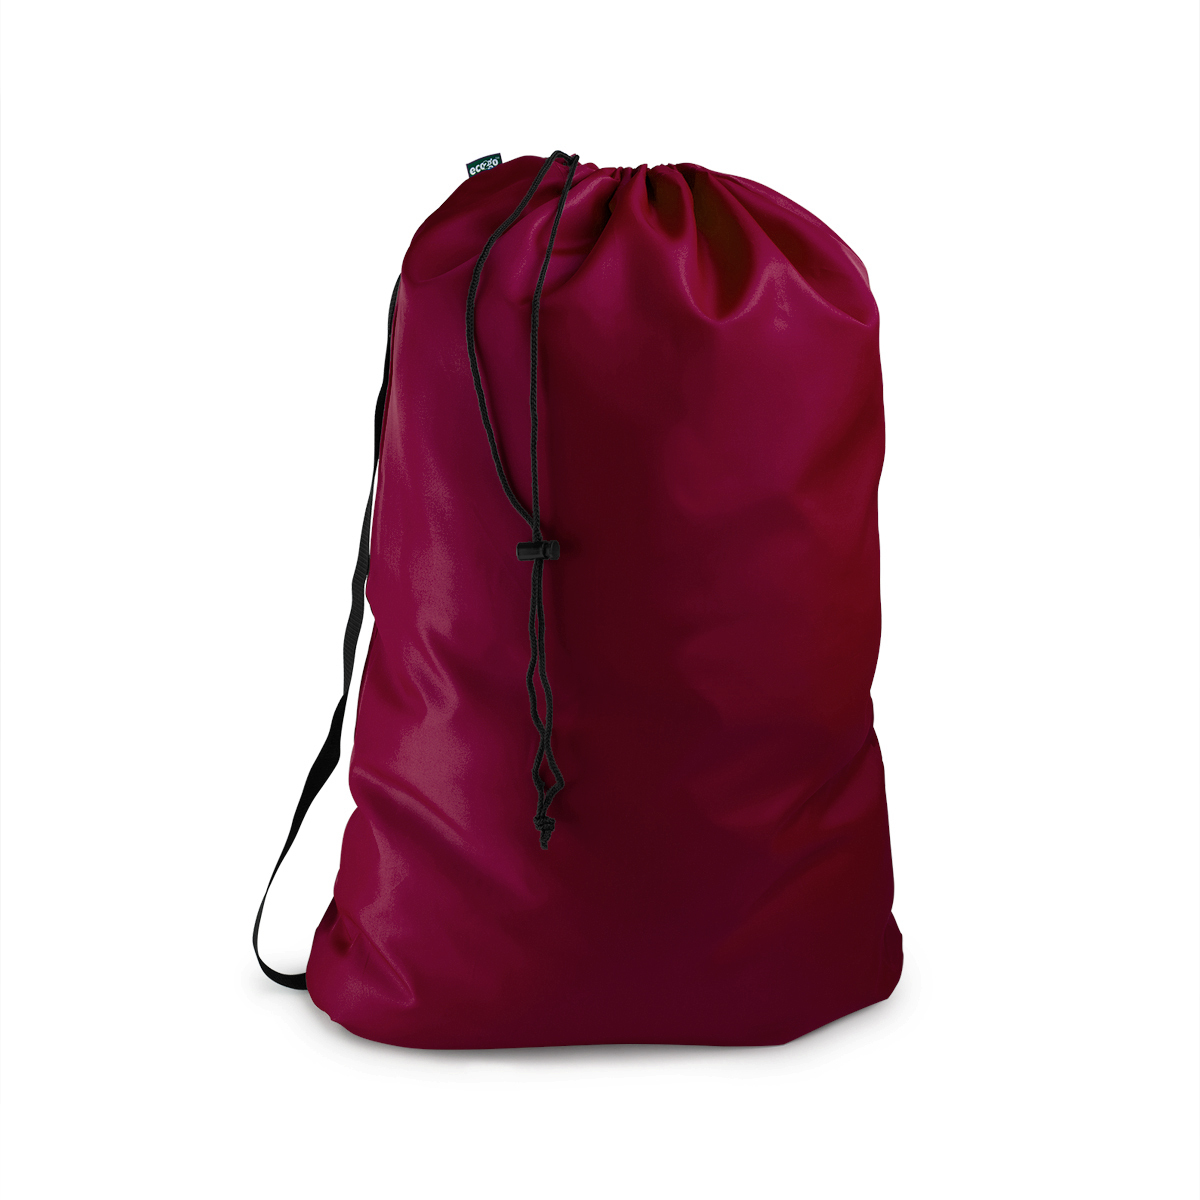 LUCKSTONE YSD-01 Outdoor Camping Waterproof Compression Storage Bag Drawstring Nylon Pack - Wine Red